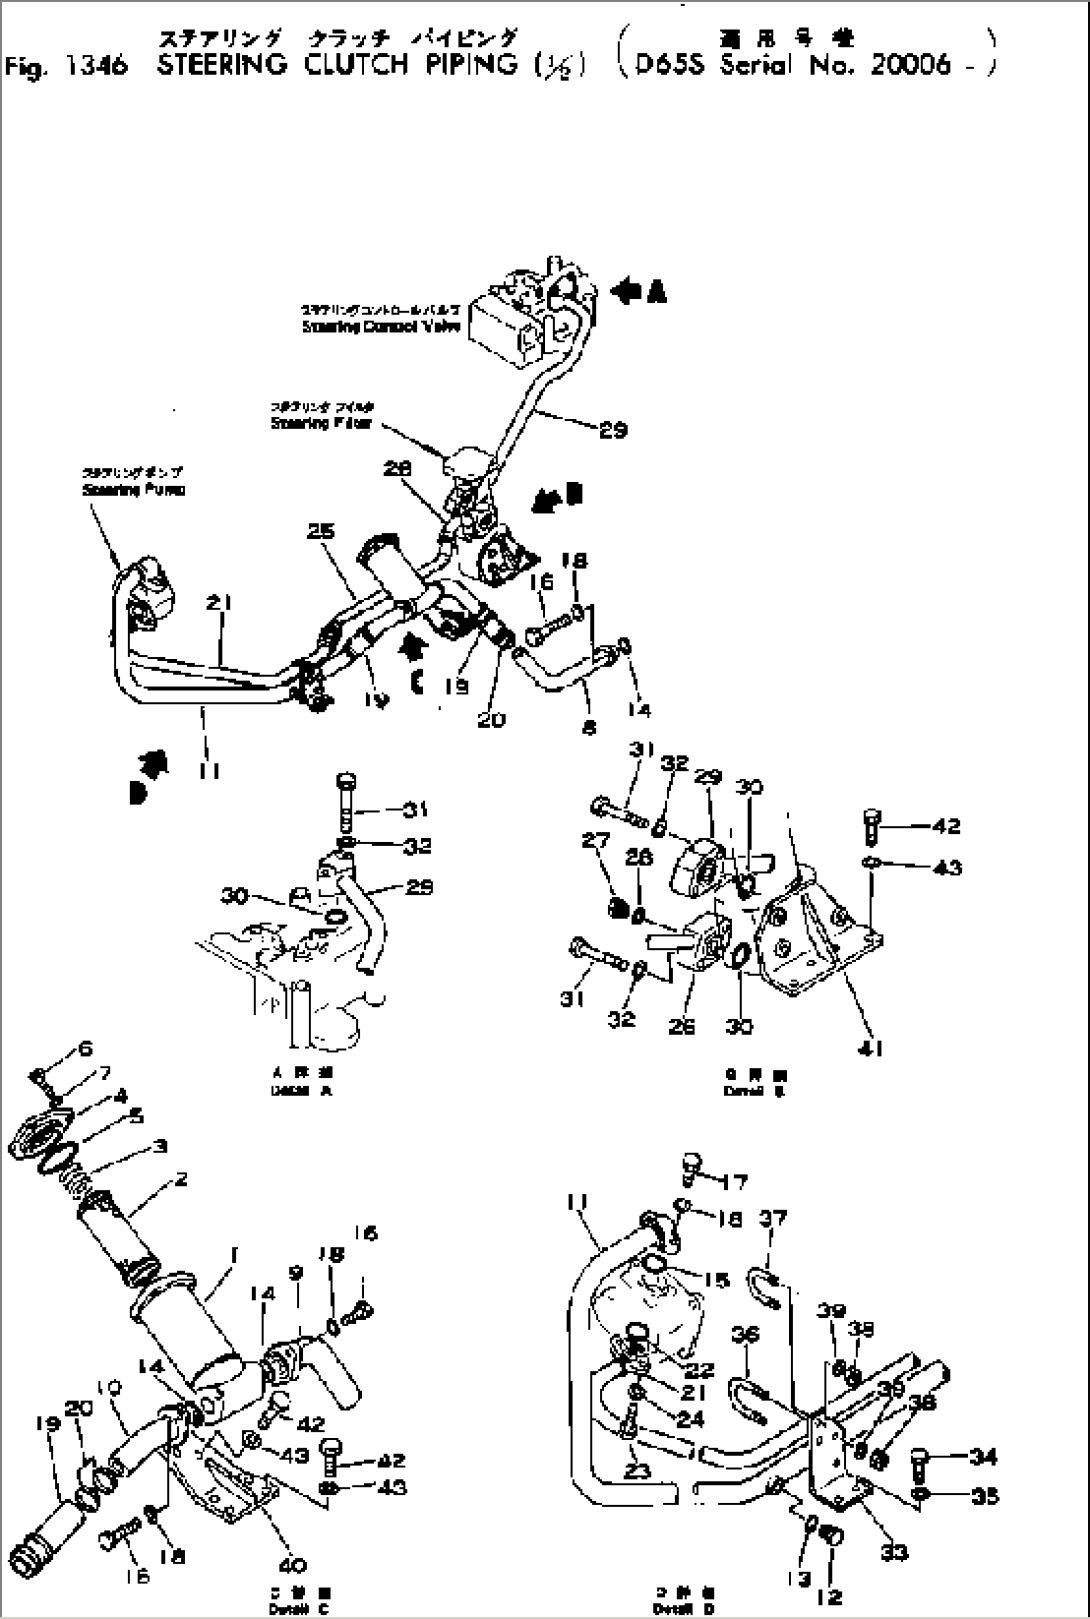 STEERING CLUTCH PIPING (1/2)